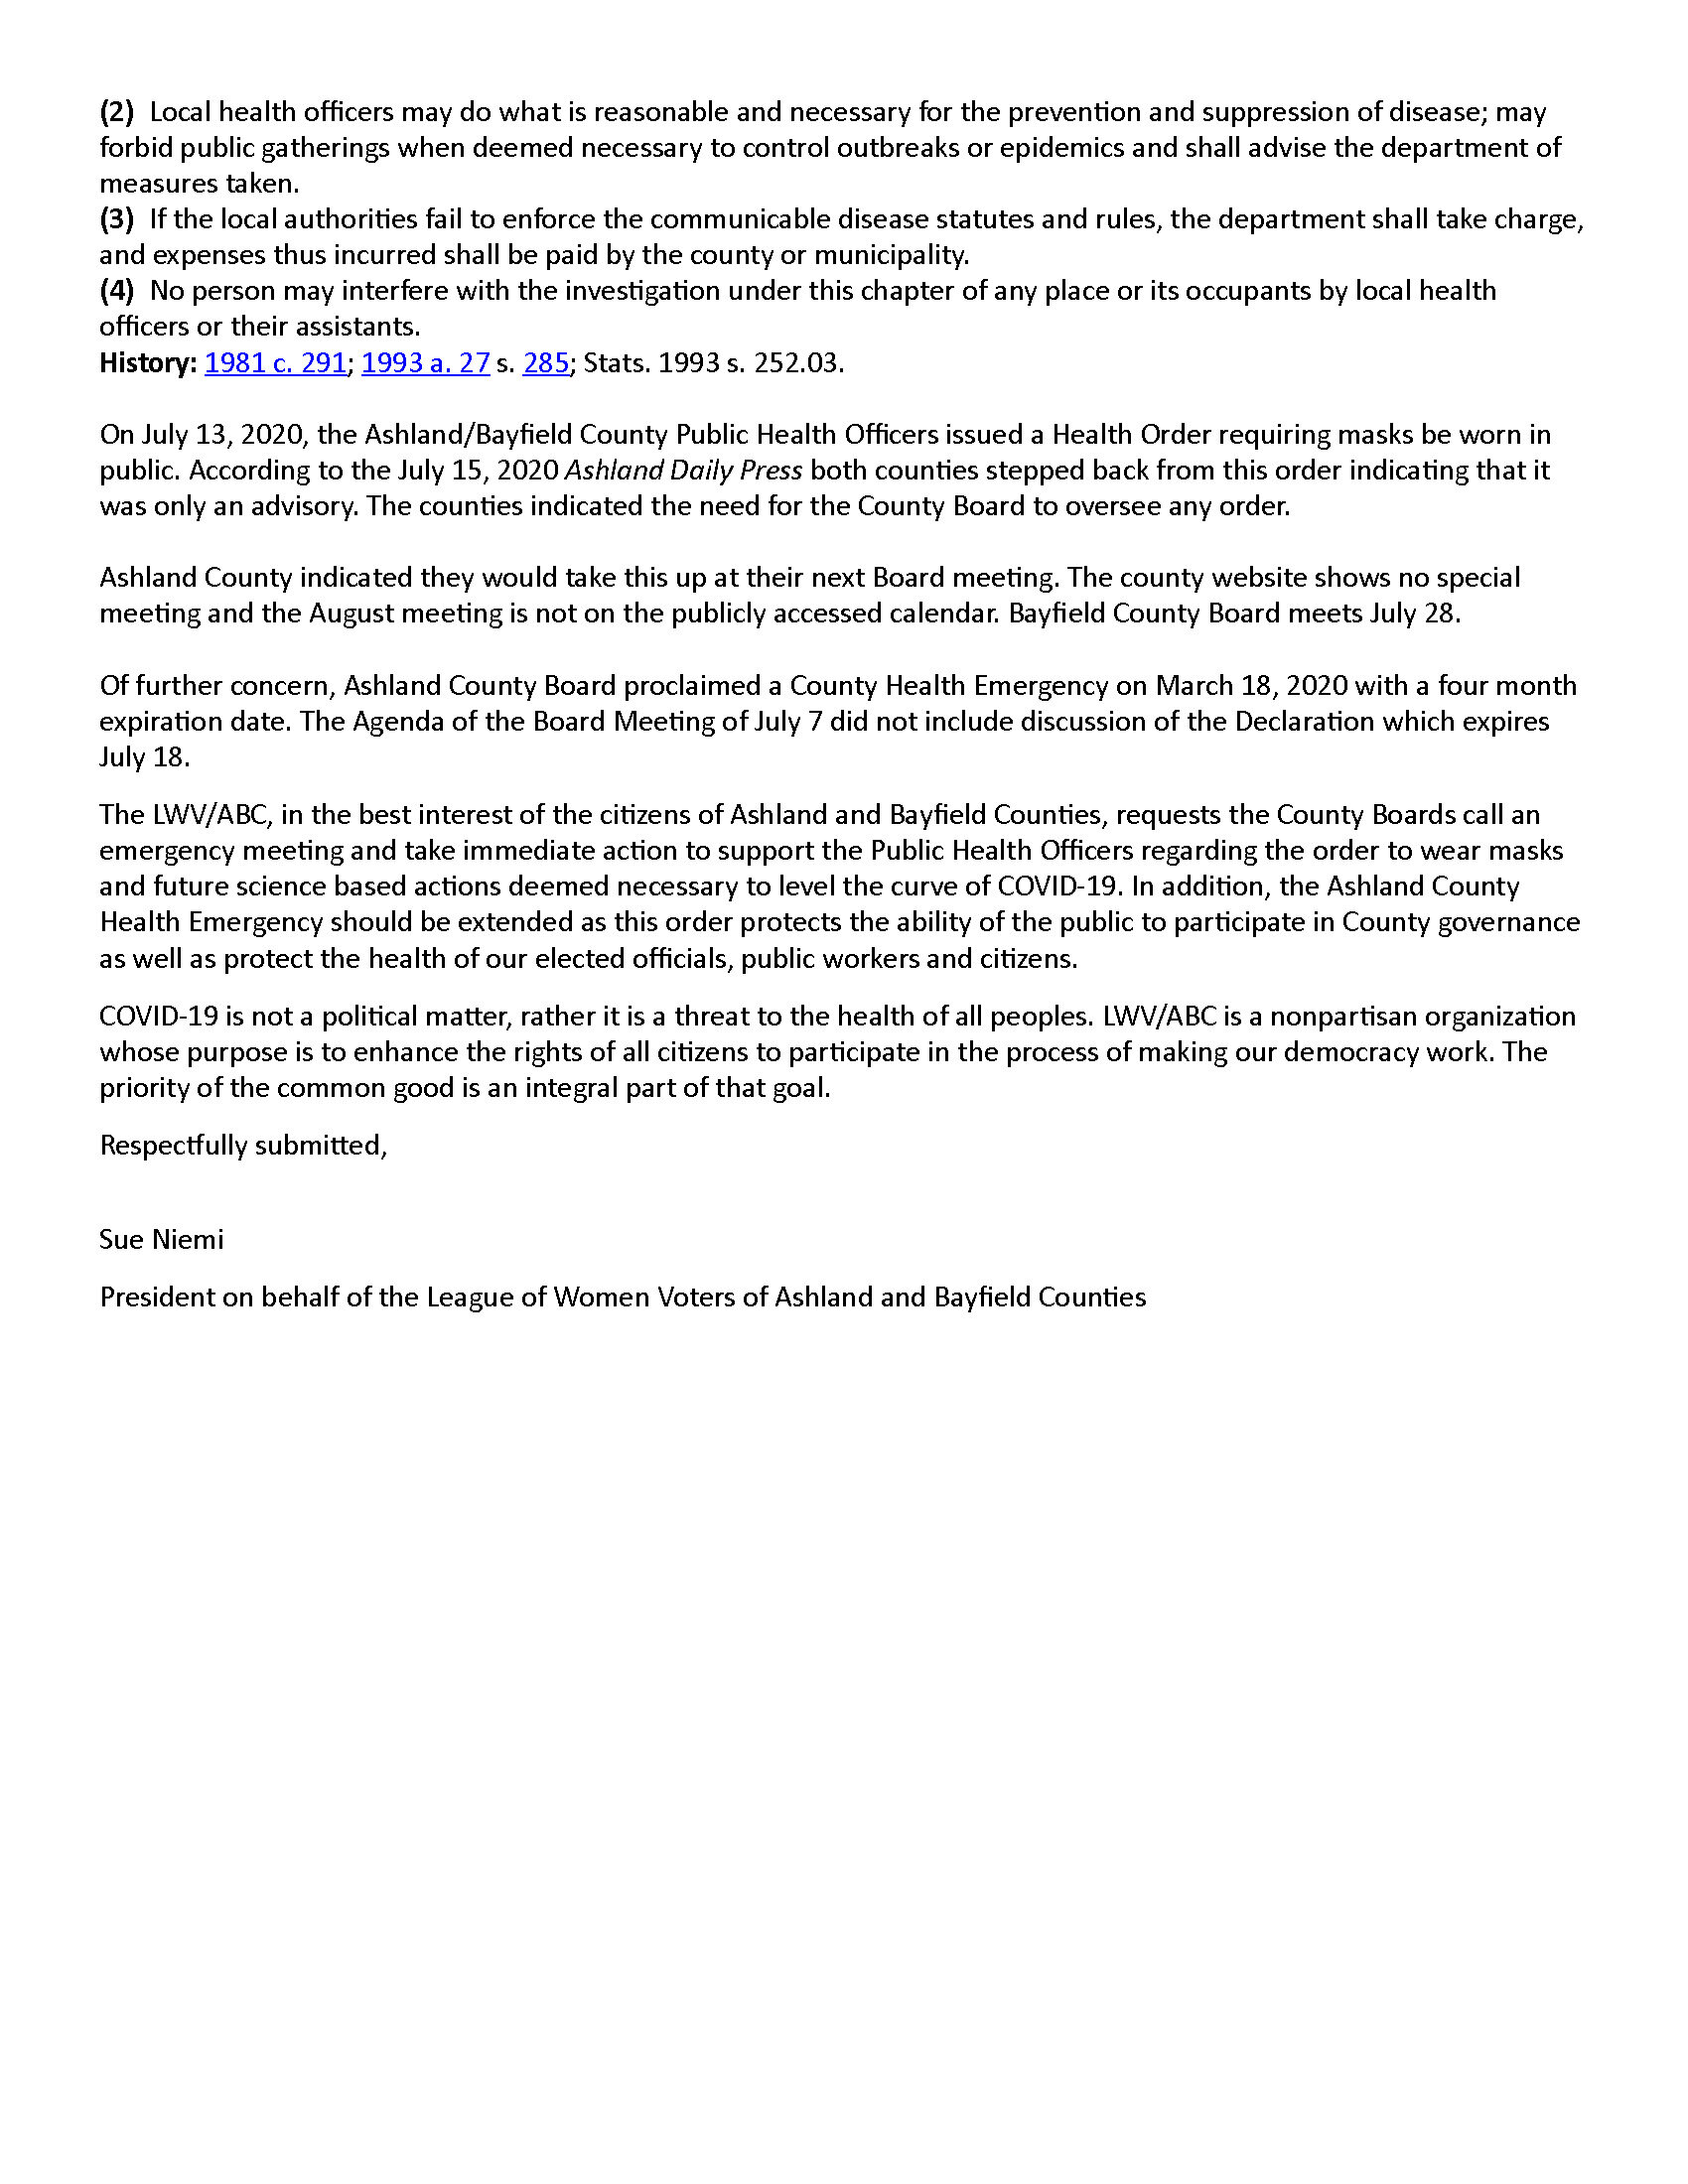 Public Health Support Letter to Bayfield County Board 071720_Page_2.jpg